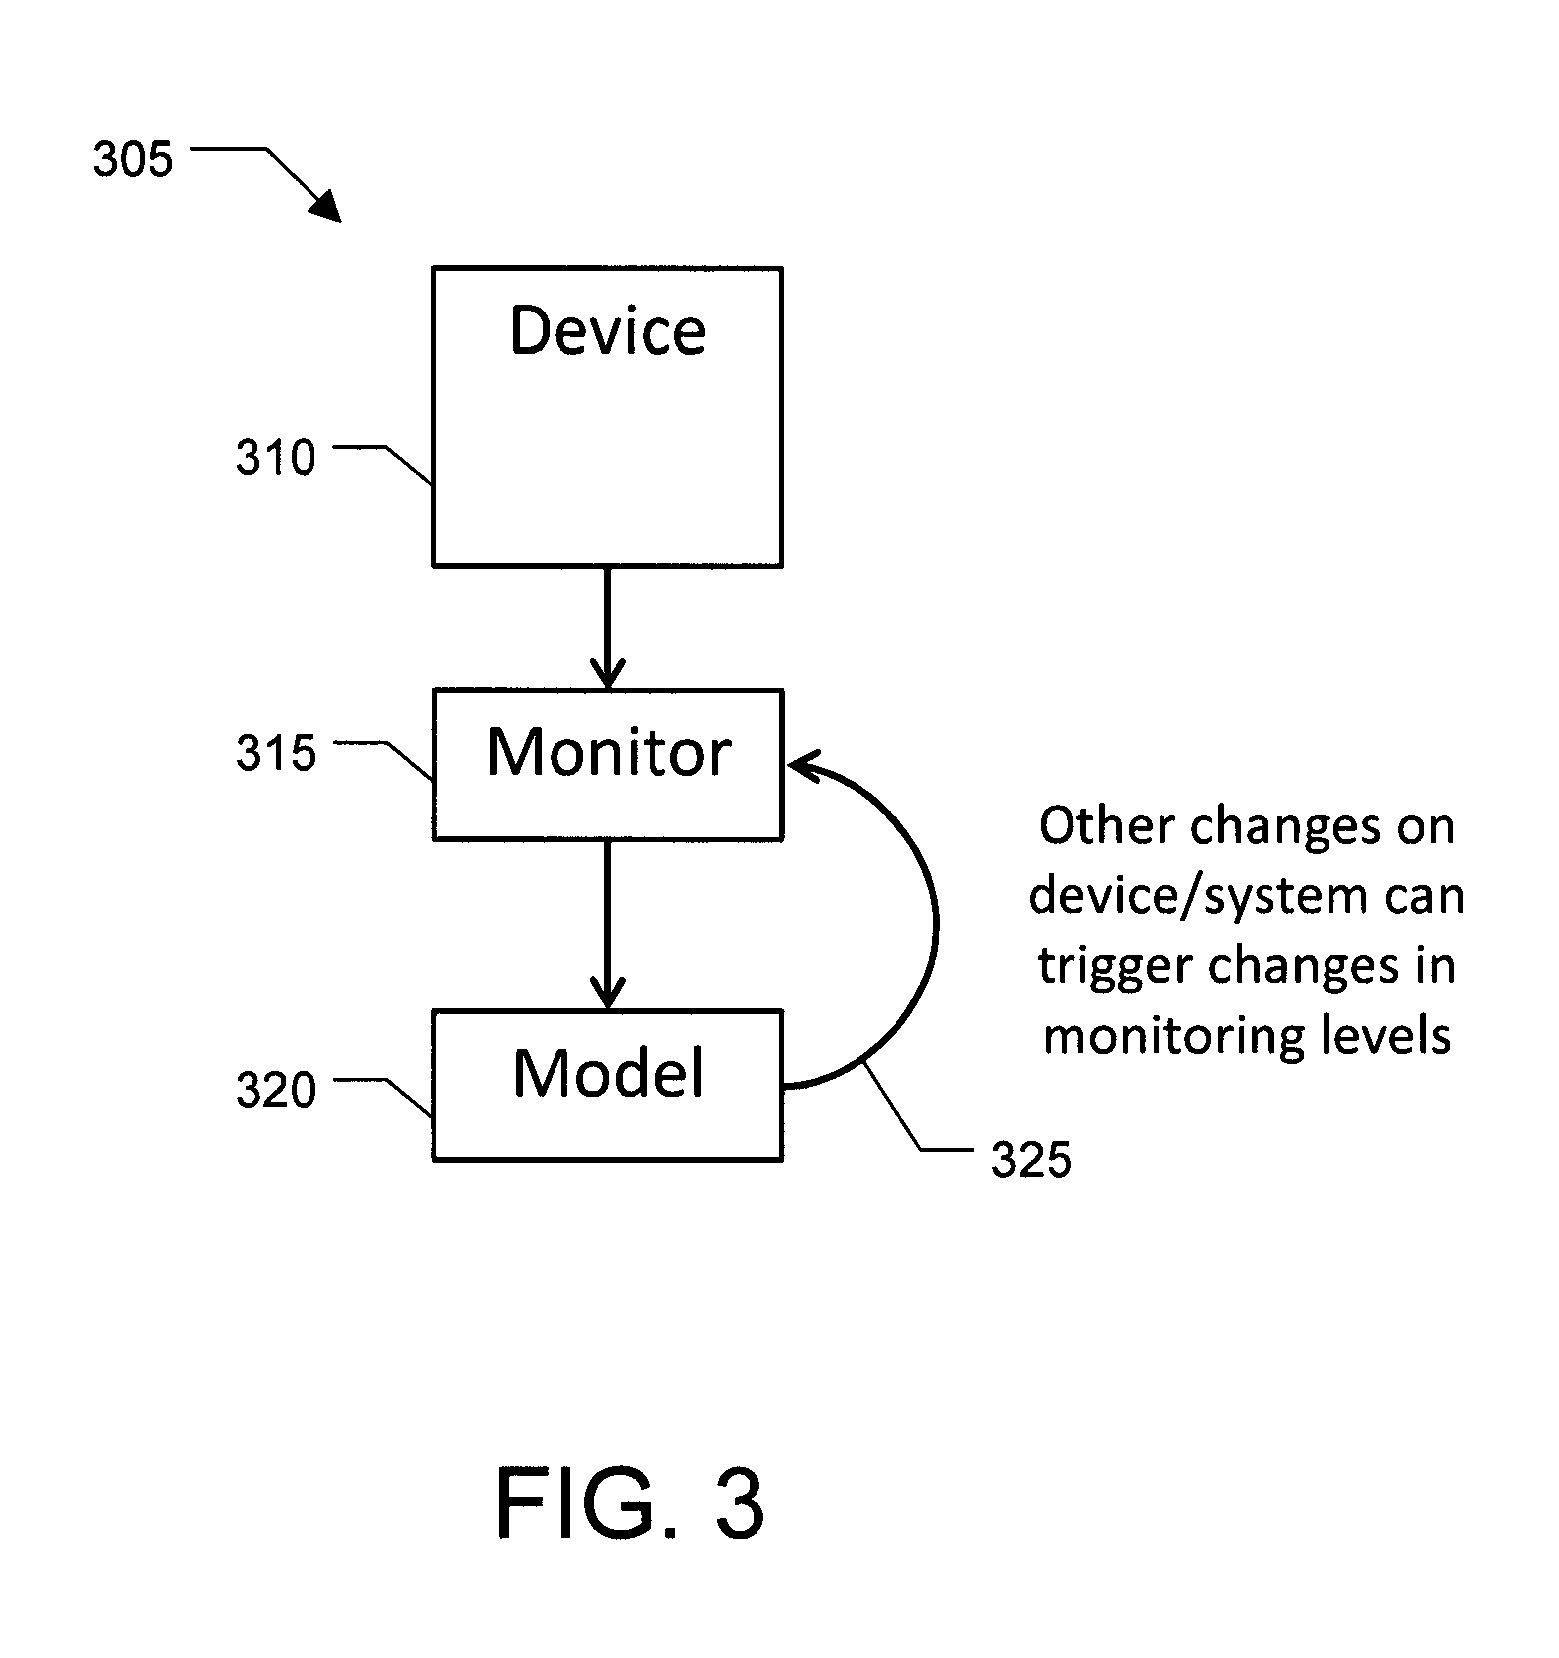 Distributed monitoring, evaluation, and response for multiple devices